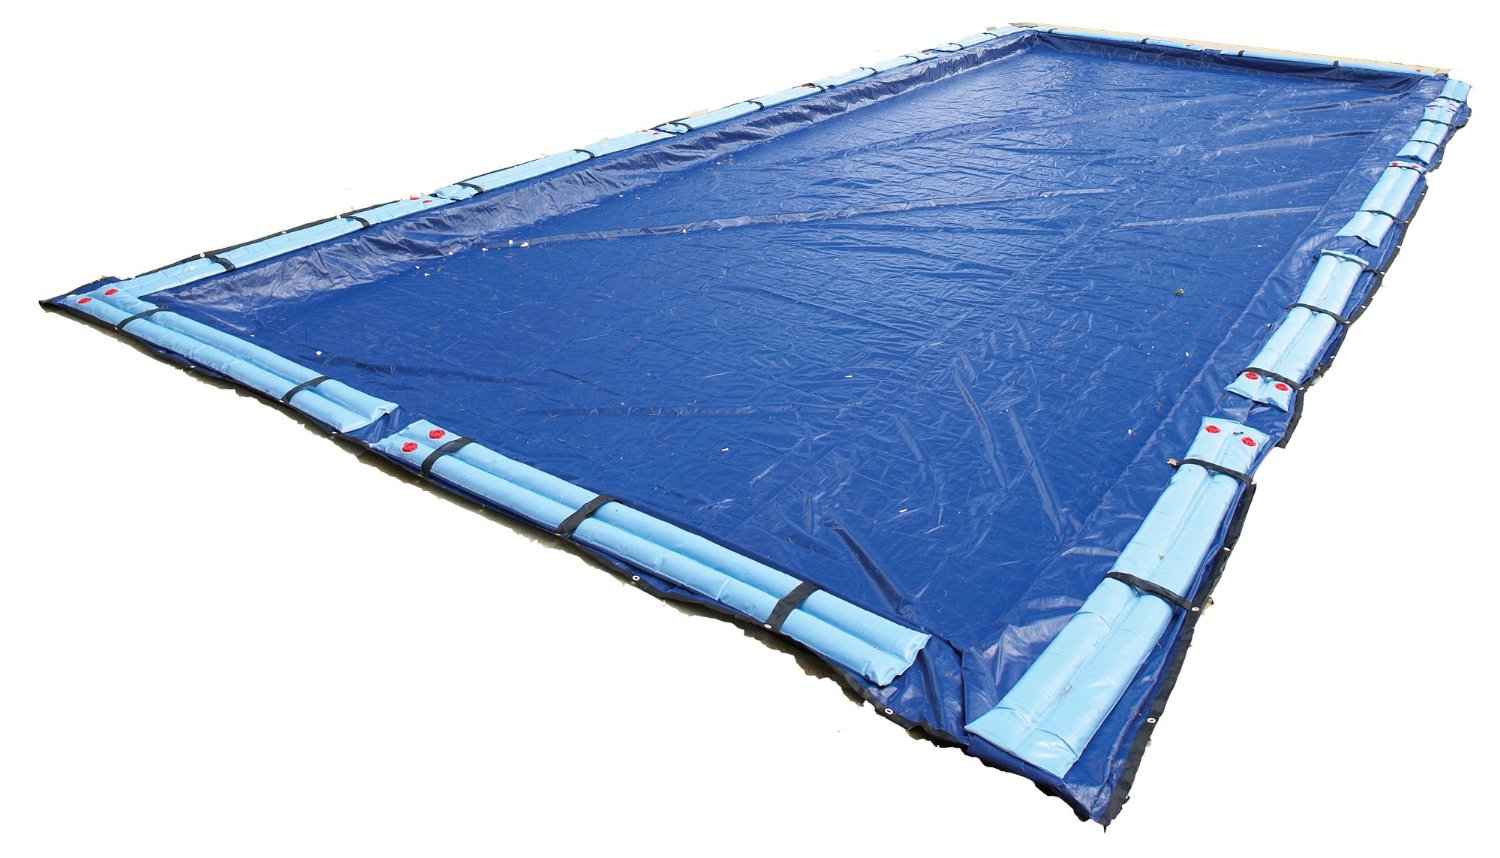 Winter Pool Cover Inground 12X24 Rectangle Arctic Armor 15 Yr Warranty w/Tubes